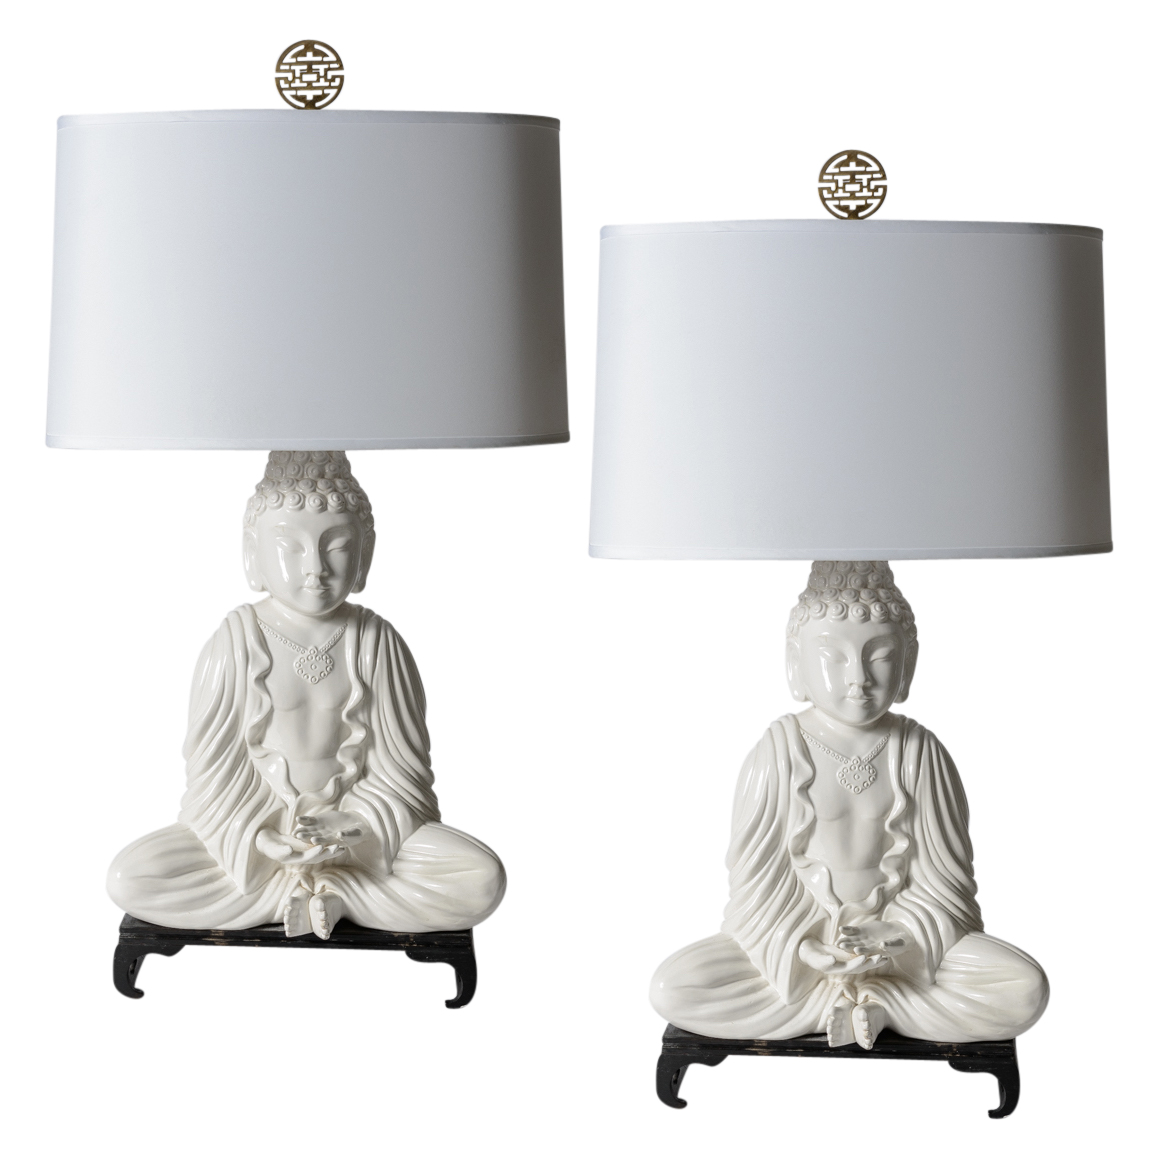 Pair of White Ceramic Buddha Lamps on Wood Stands : On Antique Row ...